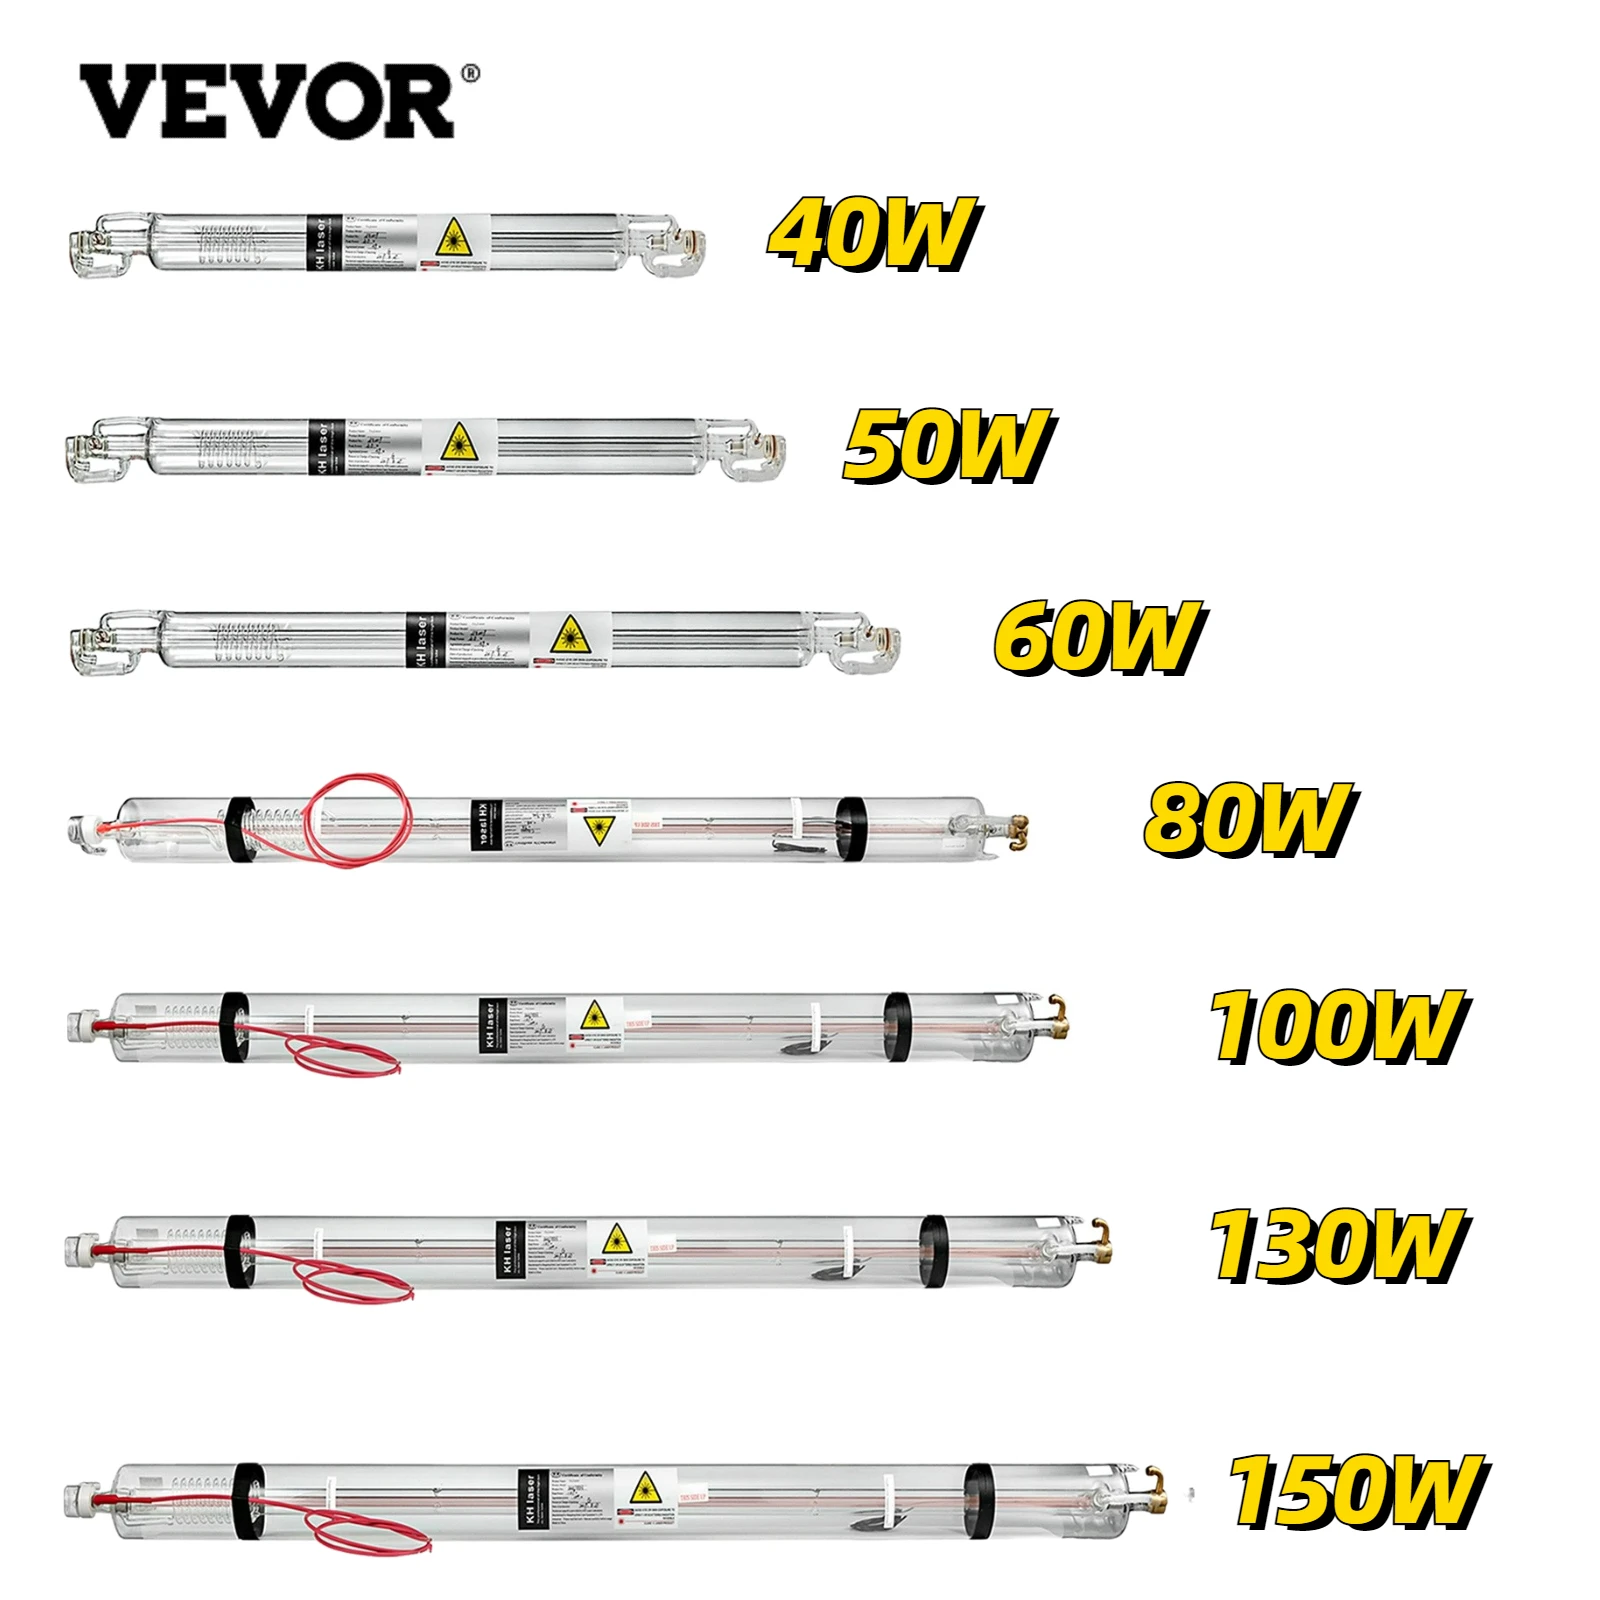 

VEVOR CO2 Laser Tube 40W 50W 60W 80W 100W 130W 150W Powerful 700mm to 1830mm Length Glass for Engraver Cutting Engraving Machine